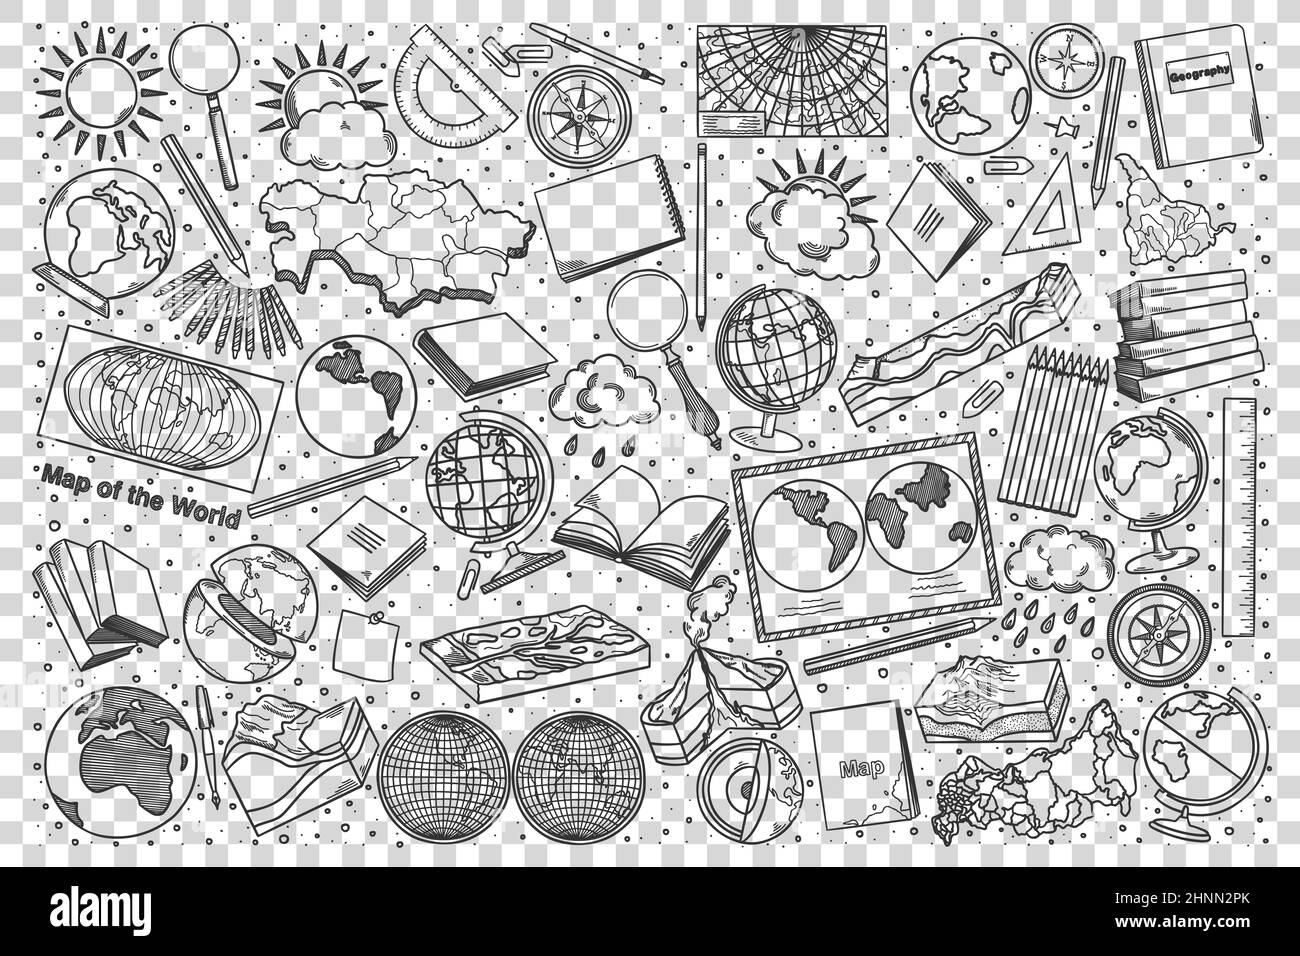 Geography doodle set. Collection of hand drawn sketches templates patterns of geographical equipment globes world maps and terrain mockups on transpar Stock Photo